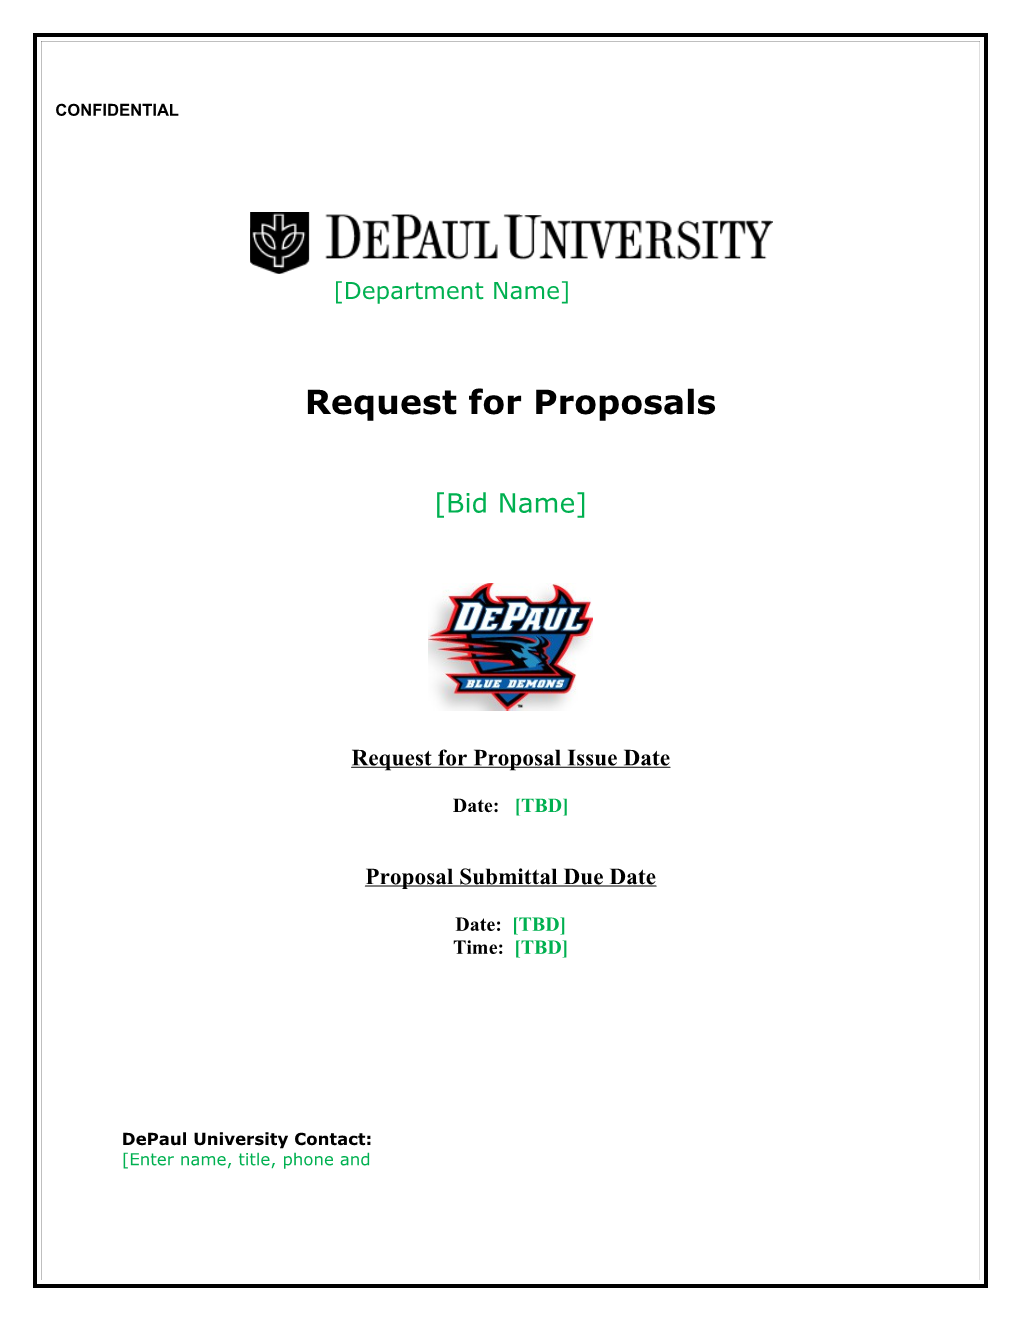 Request for Proposal Issue Date